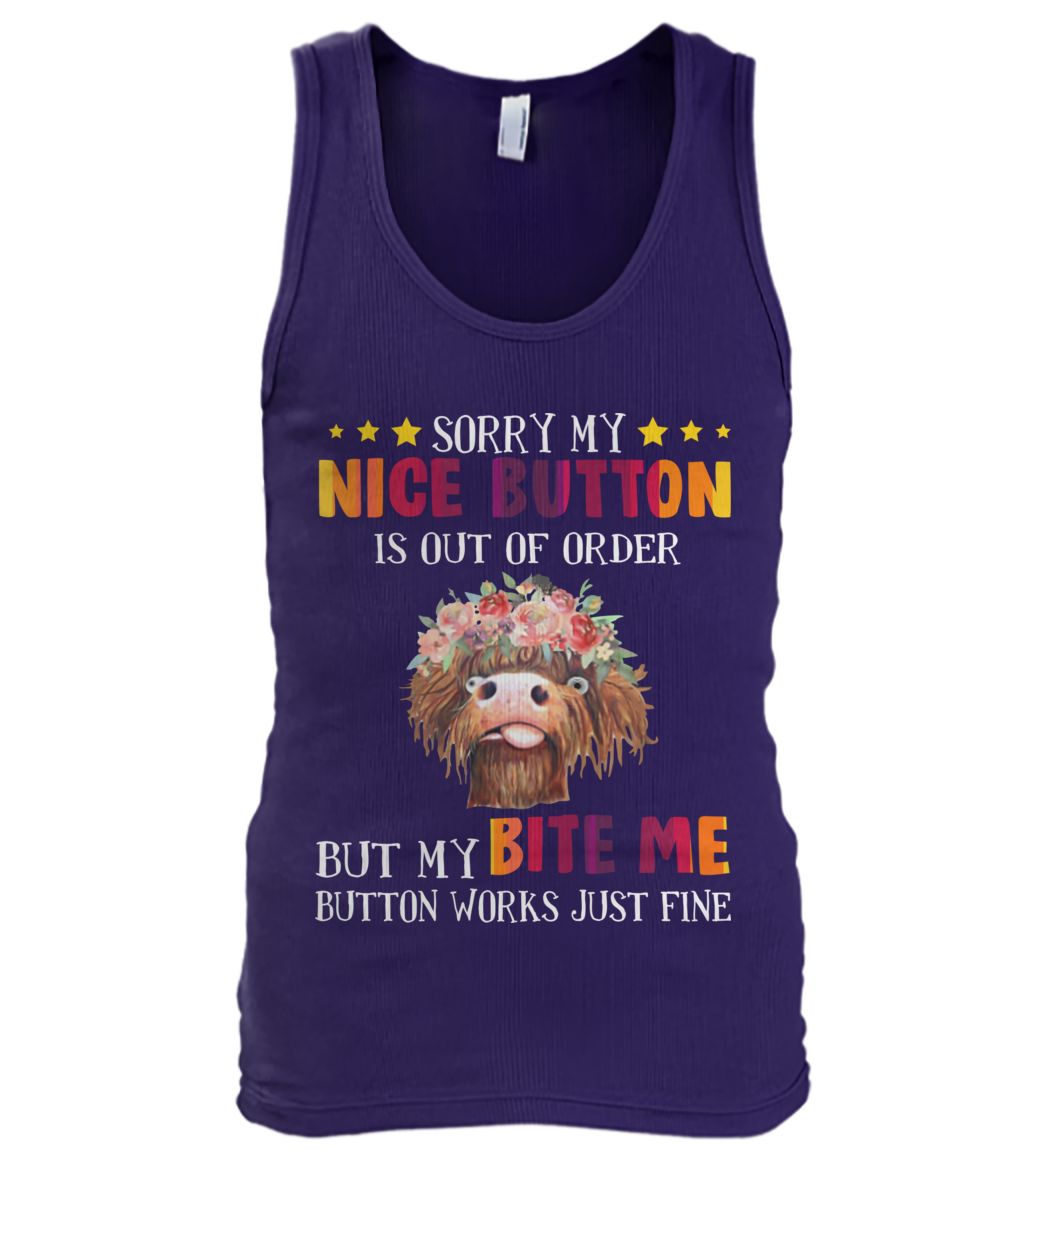 Sloth sorry my nice button is out of order but my bite me button works just fine men's tank top